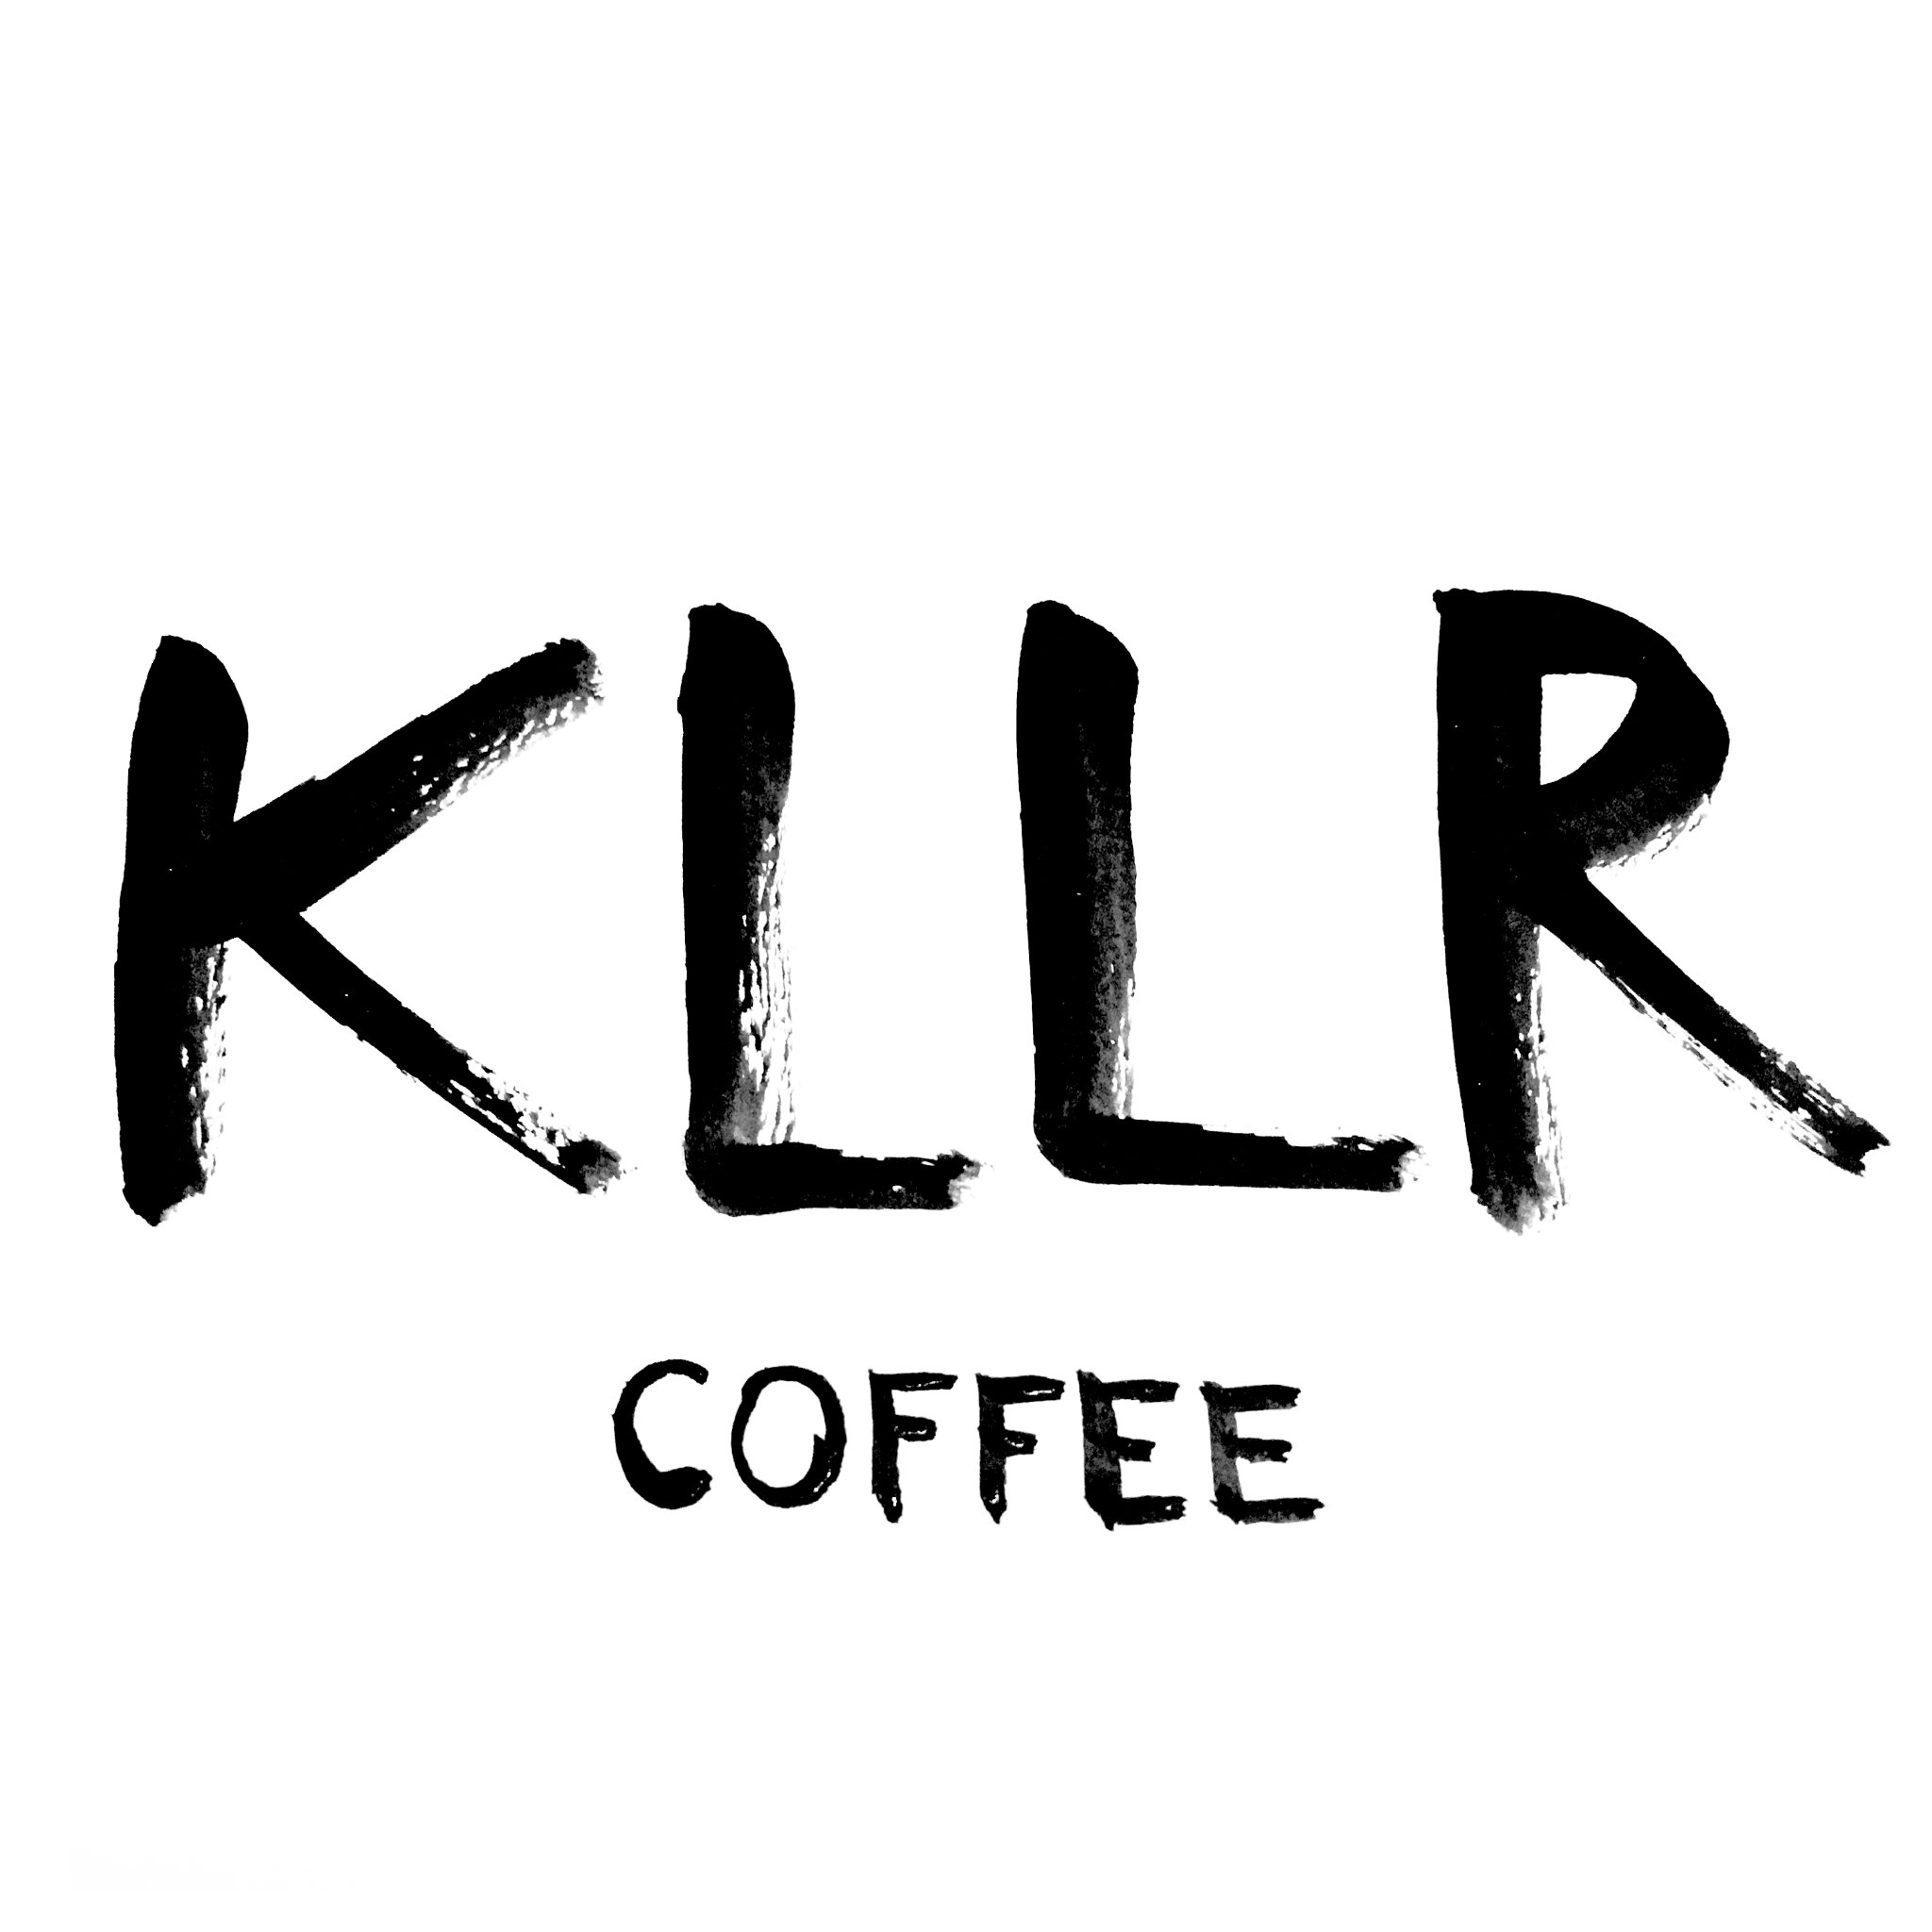 Roast to order coffee and everything else you need to create an amazing coffee program. wholesale@kllrcoffee.com